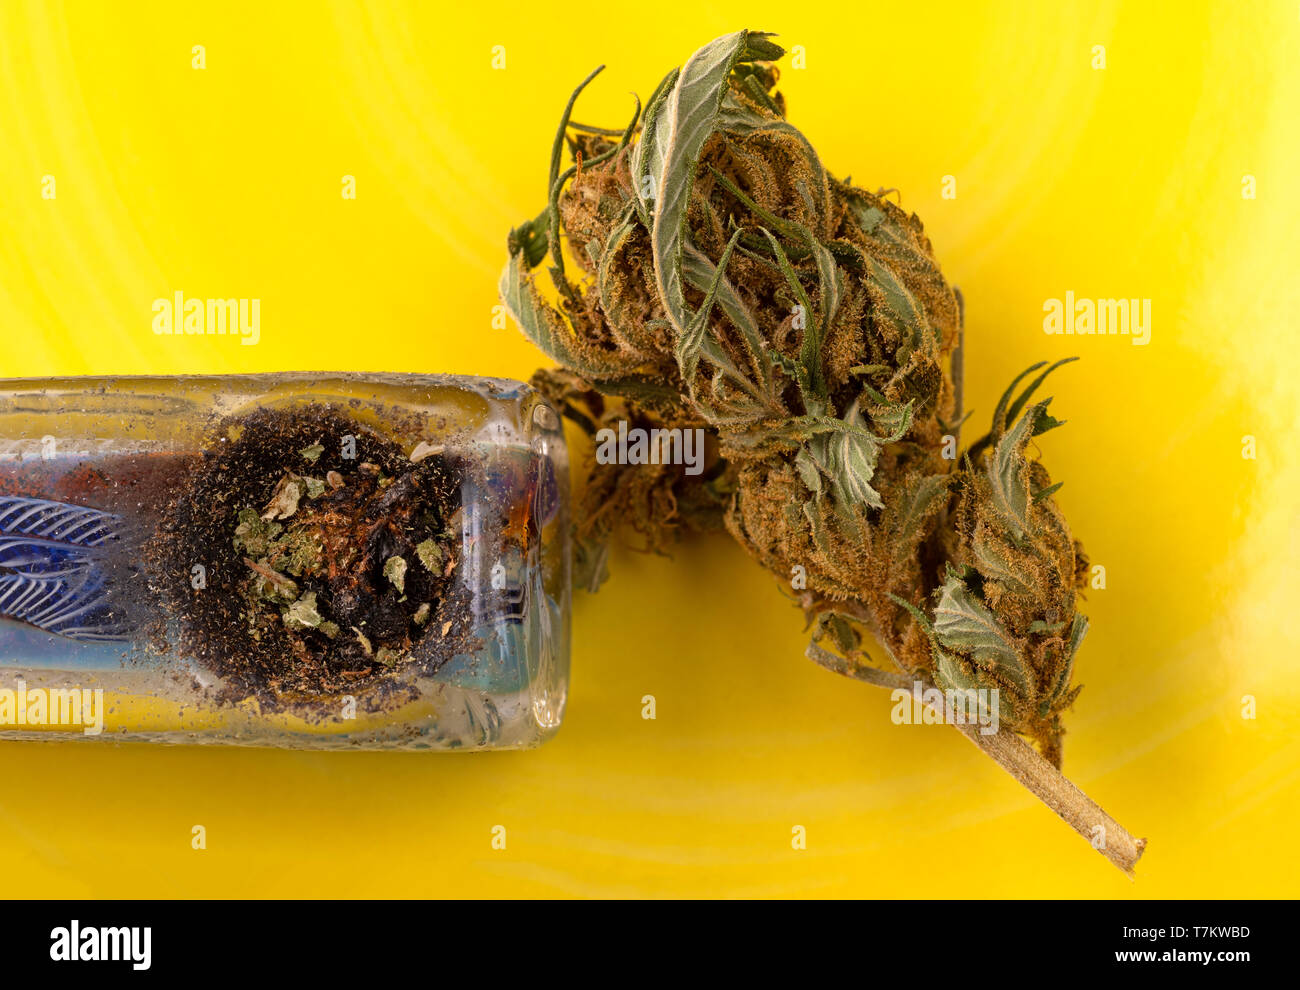 Overhead close view of a marijuana bud on a yellow background with a small generic pipe illuminated with natural lighting. Stock Photo